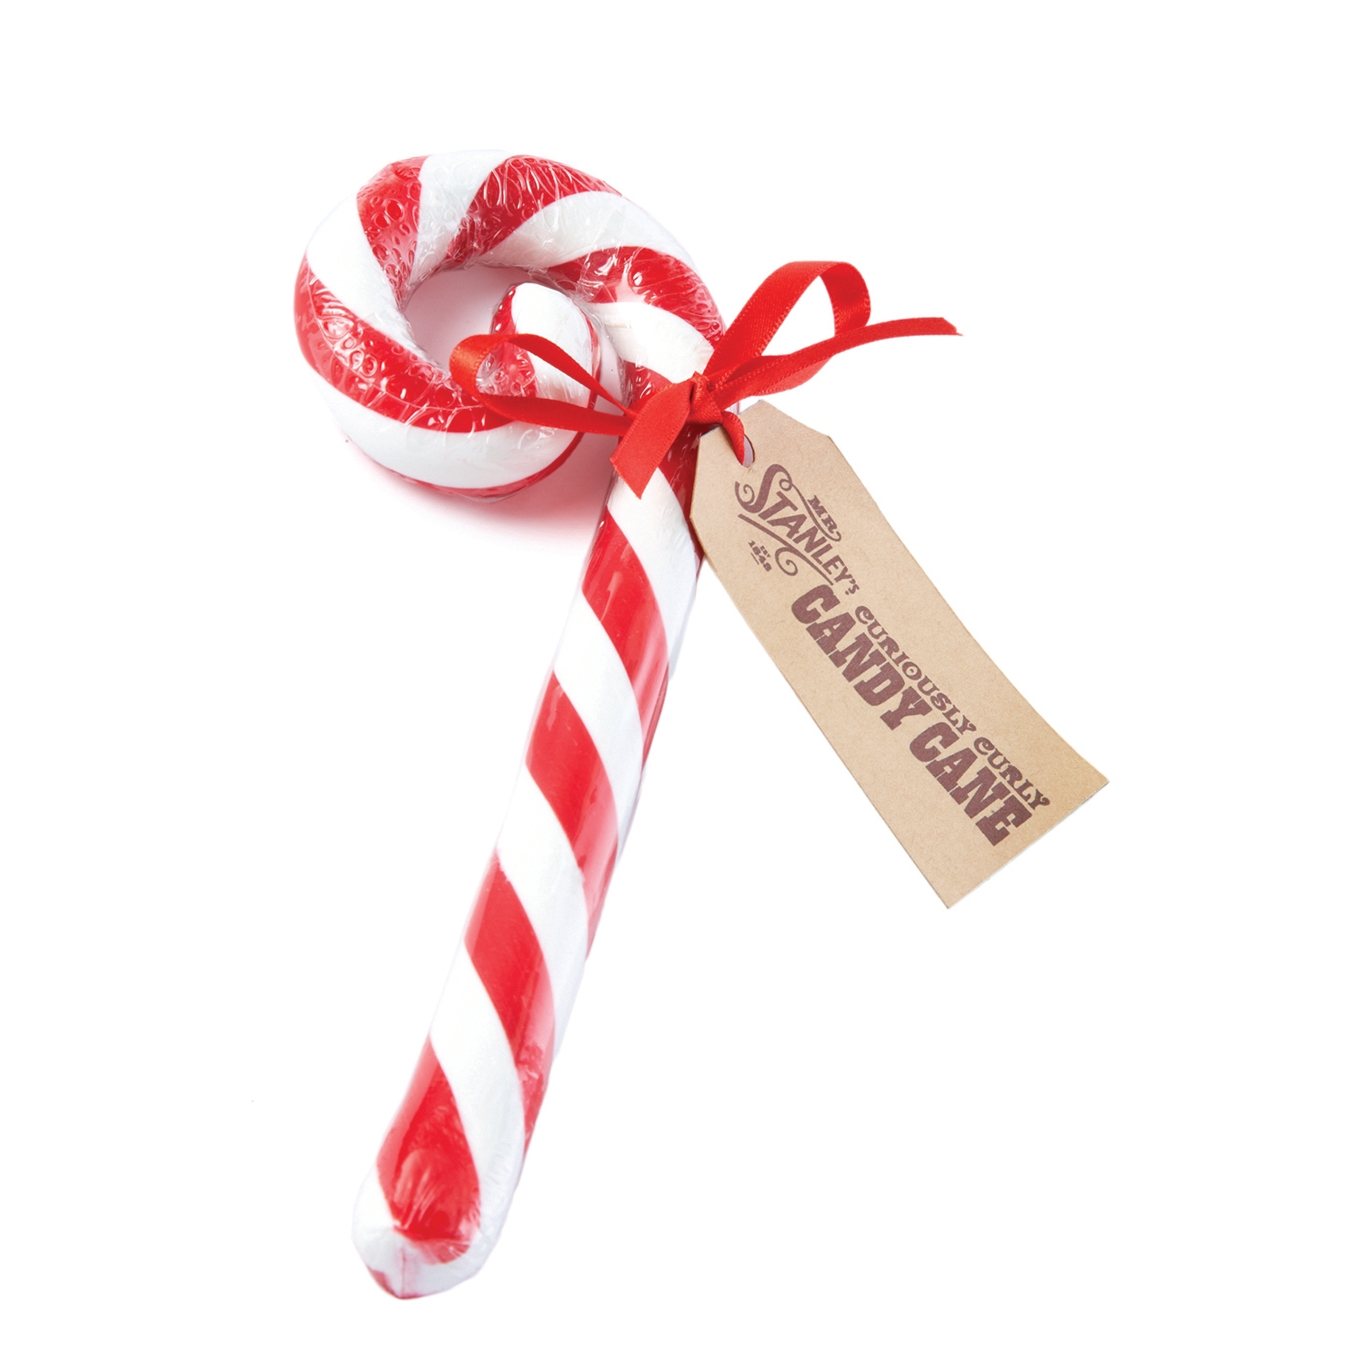 Mr Stanley's Giant Curly Candy Cane 115g